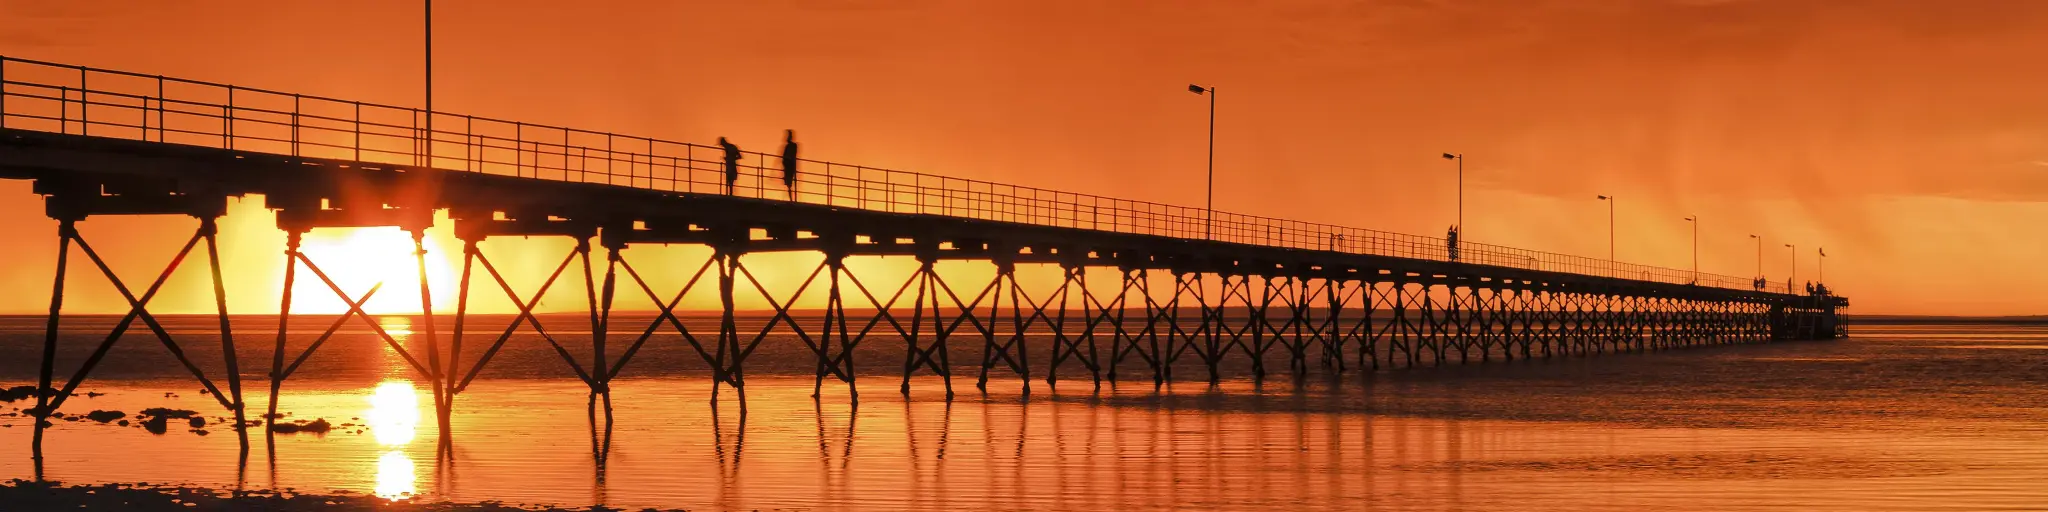 Low point view of wooden historic jetty in Ceduna with an incredibly dramatic orange sunset